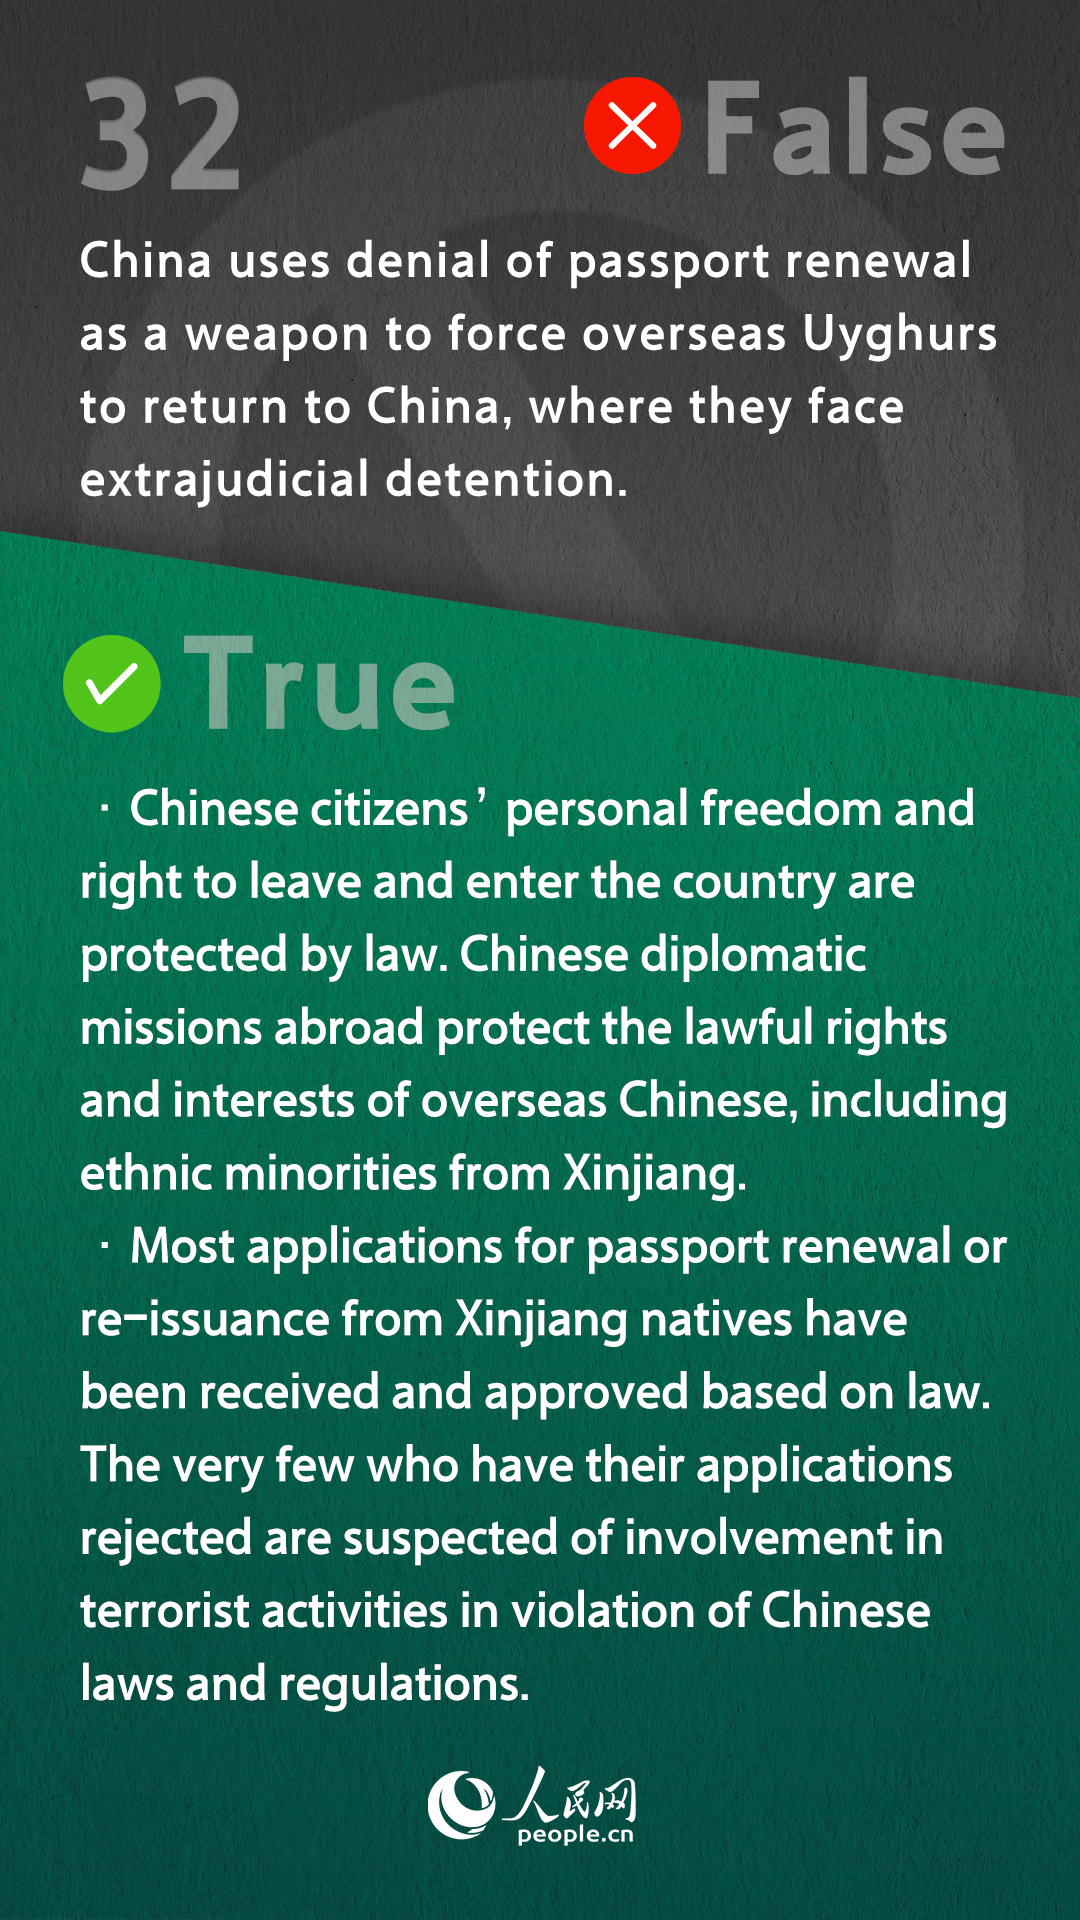 Reality Check of Falsehoods on China-related Human Rights Matters